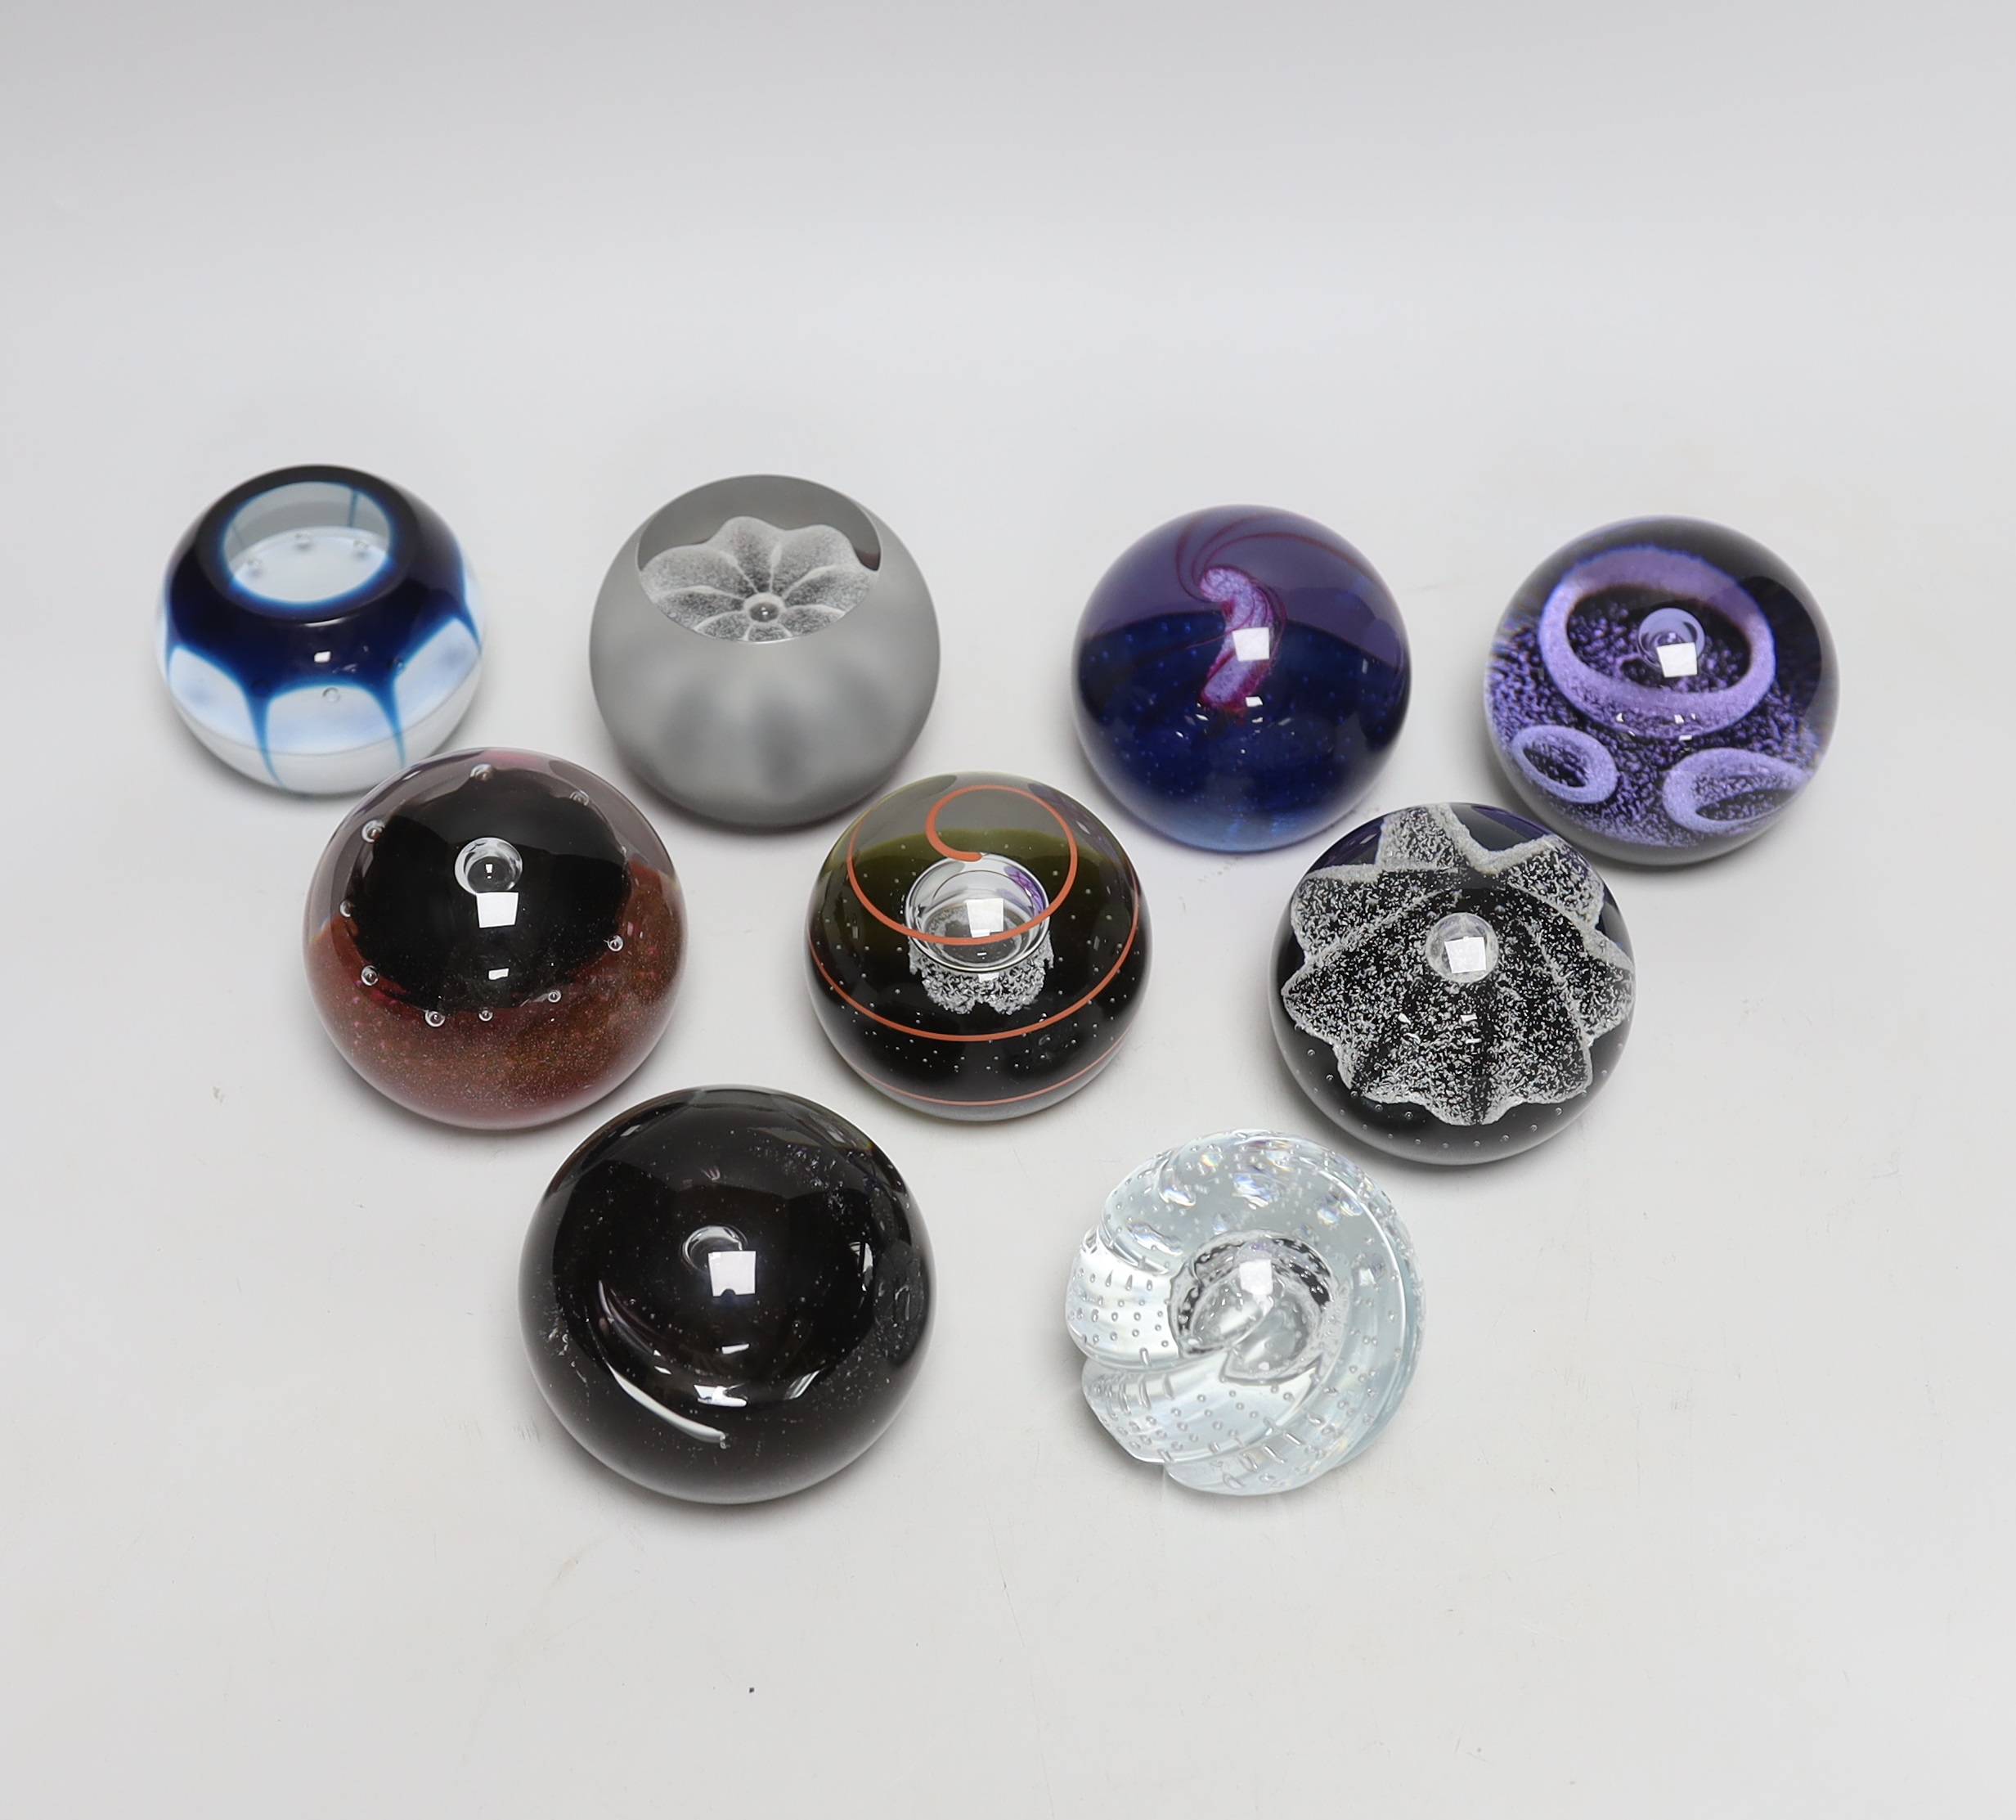 Nine Caithness paperweights including Ice Blossom, limited edition 419/1000 and Touchdown, 361/1000, each with boxes, the largest 7.5cm high